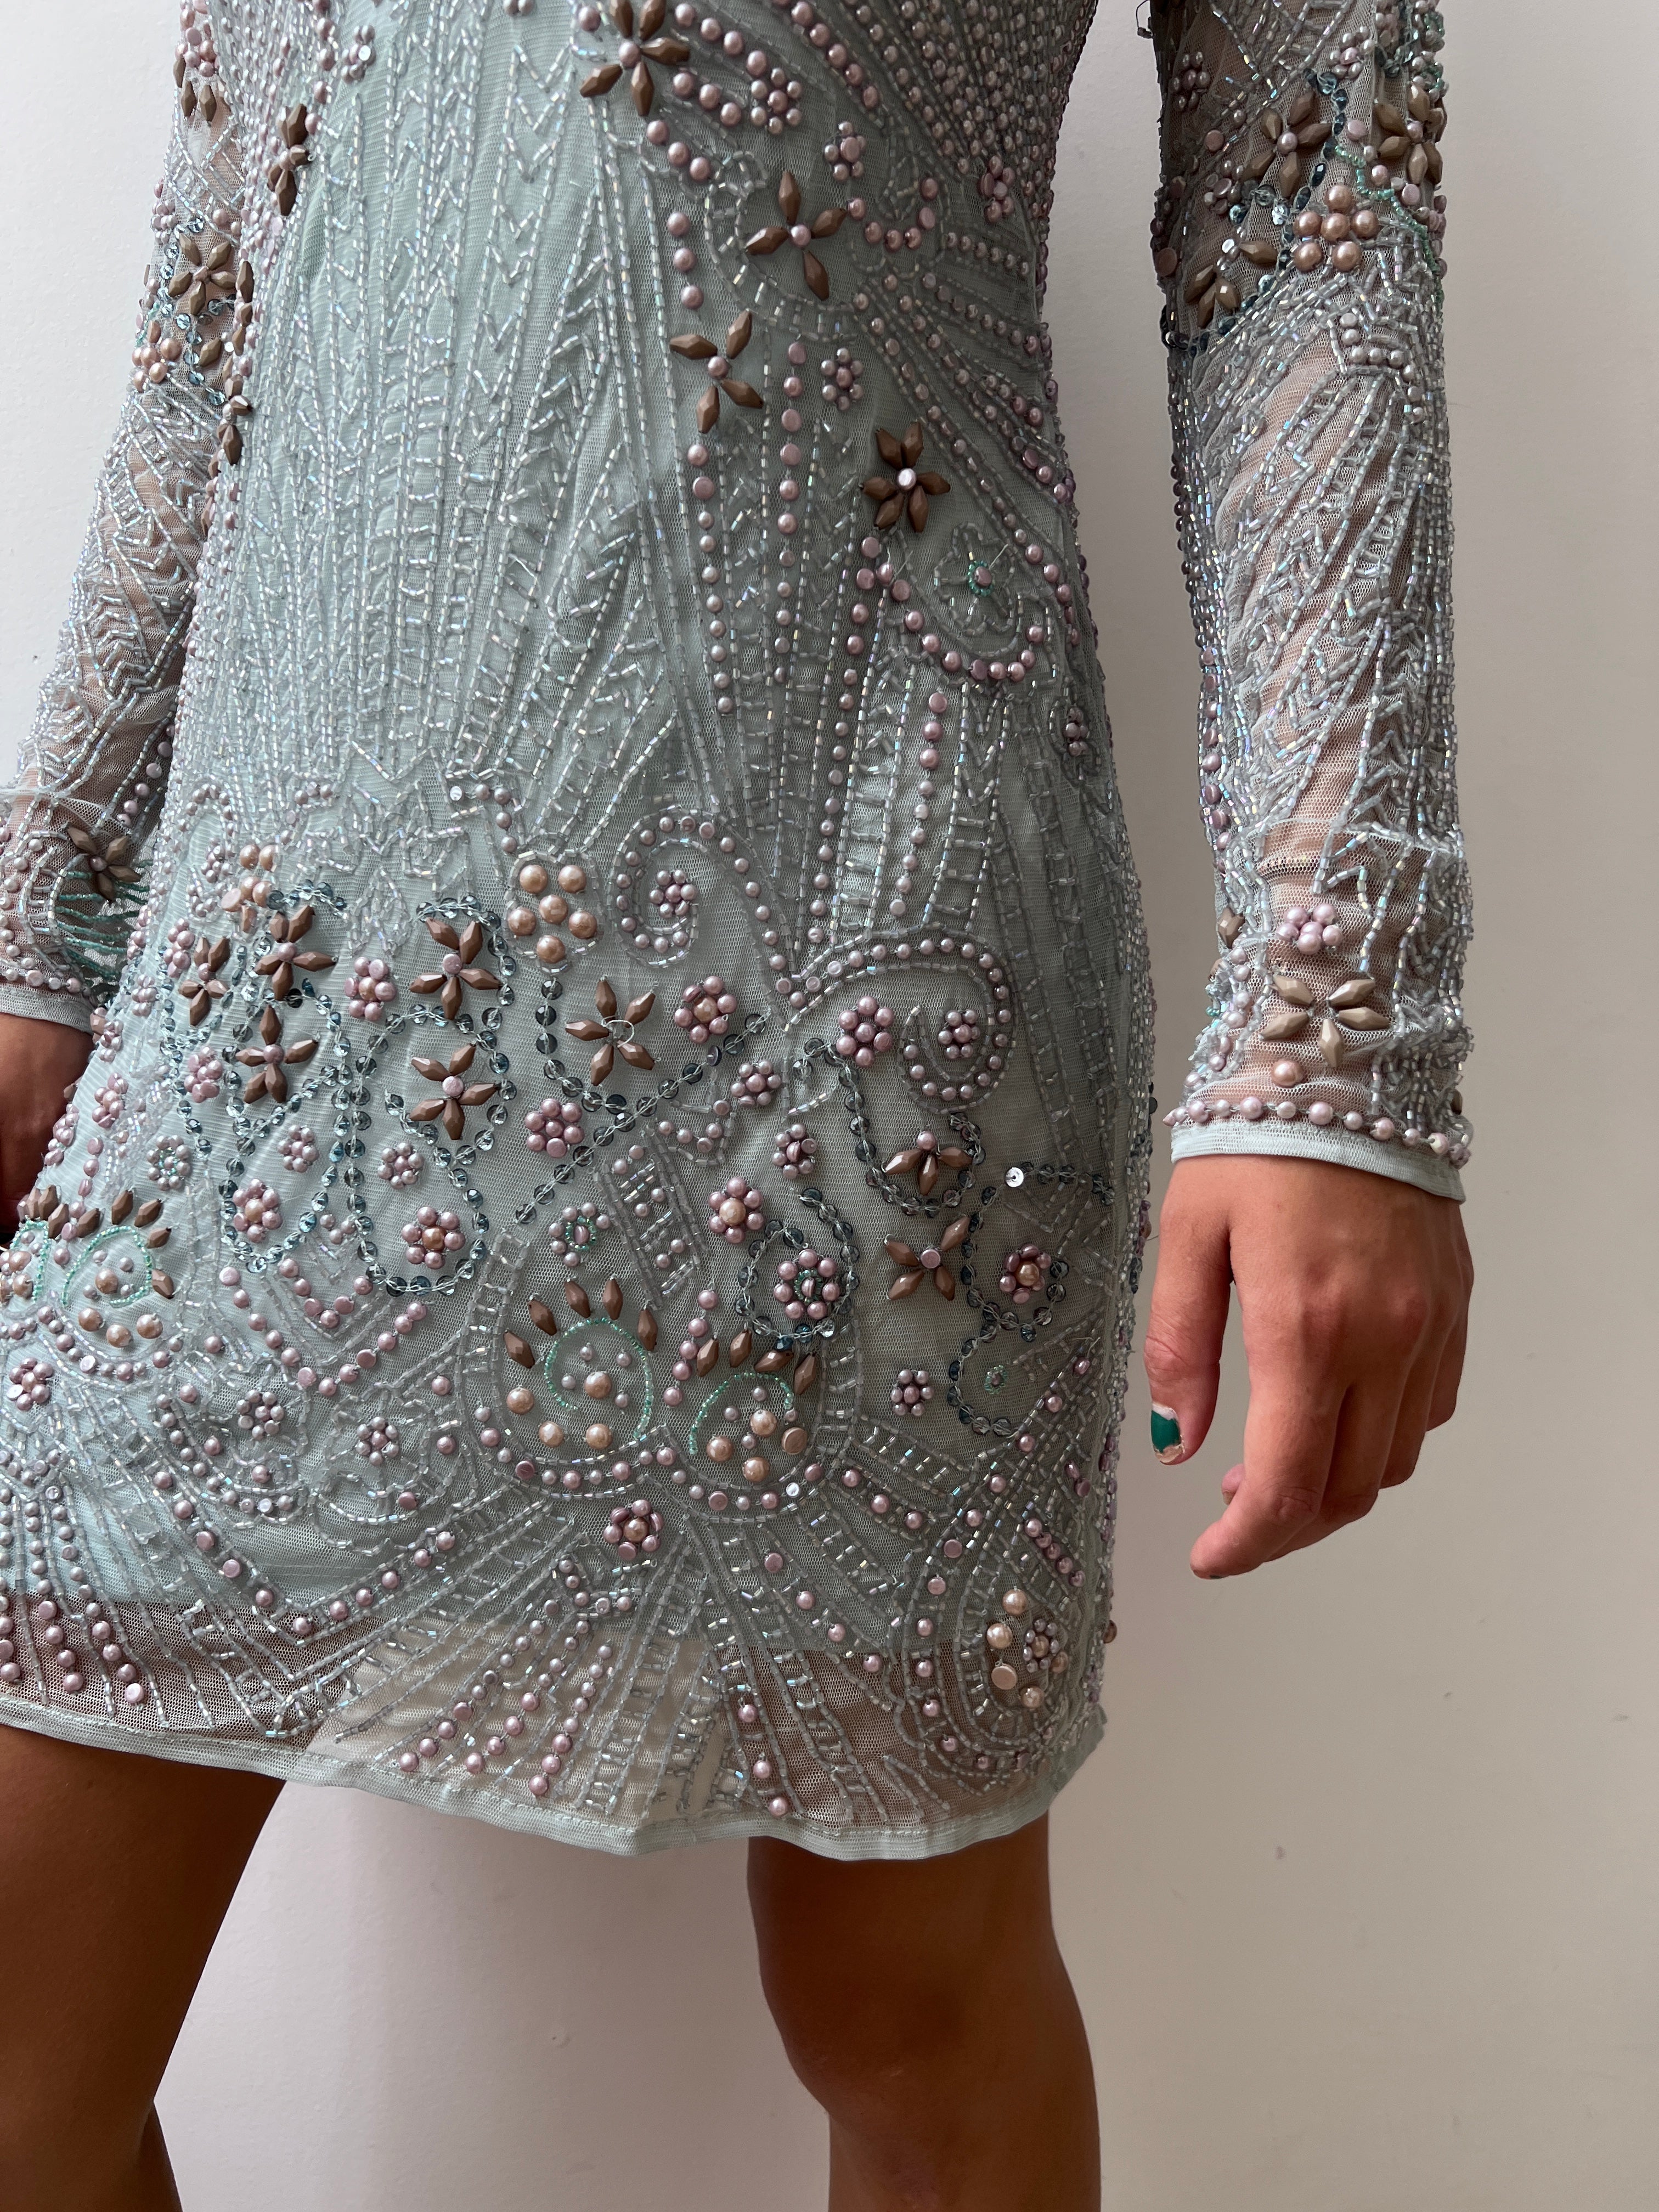 Not specified Dresses Small Soft Blue Sequin Mini Dress